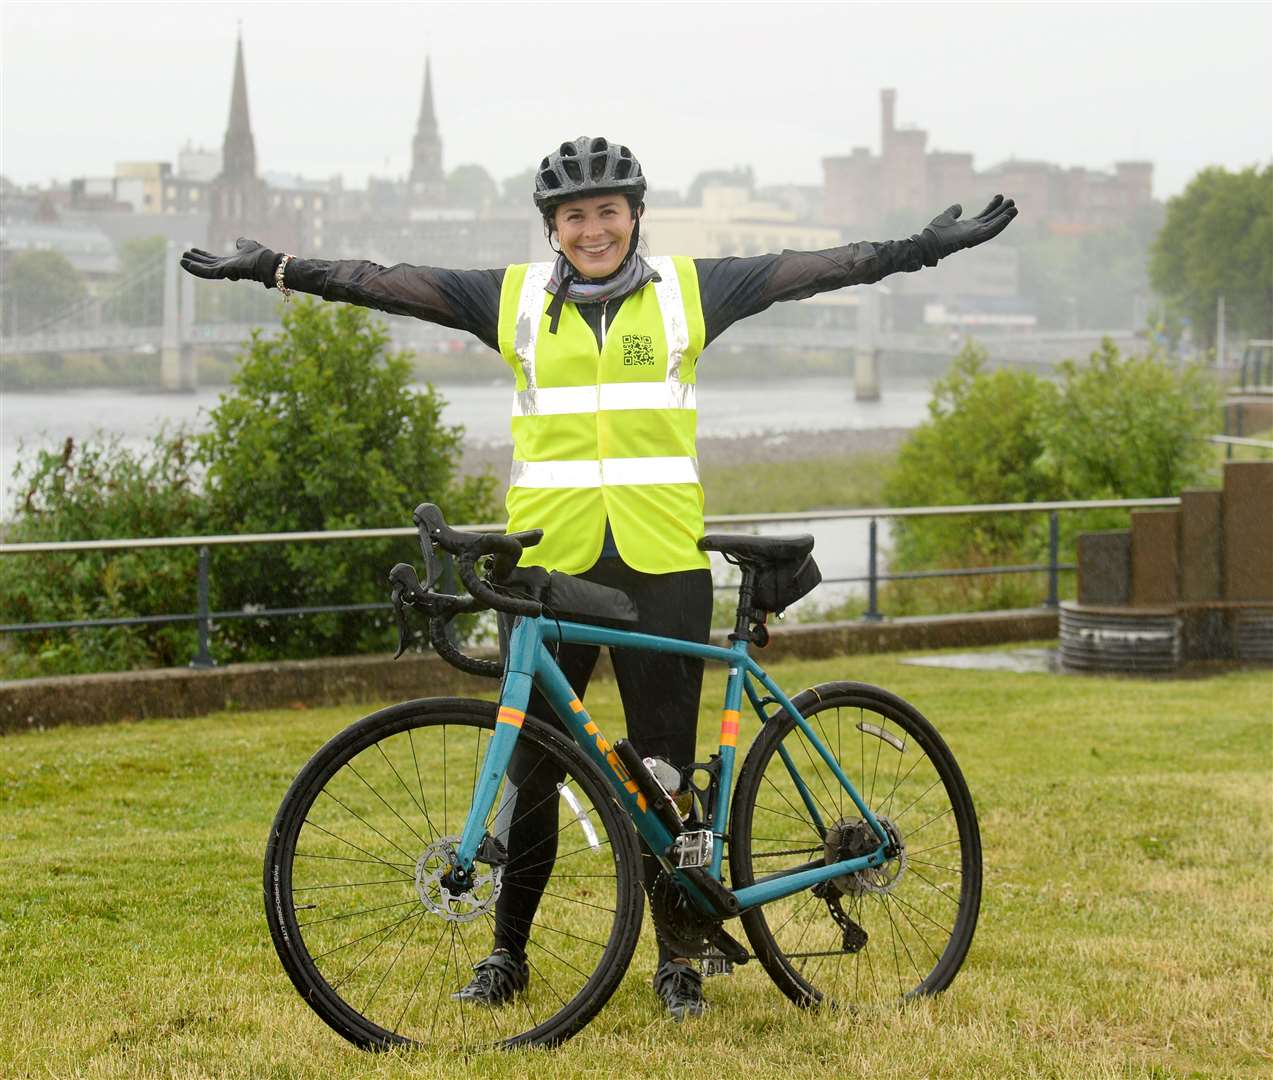 Abbie McCahill is doing a charity bike ride from John O'Groats to Land's End for Mikeysline. Picture: Gary Anthony